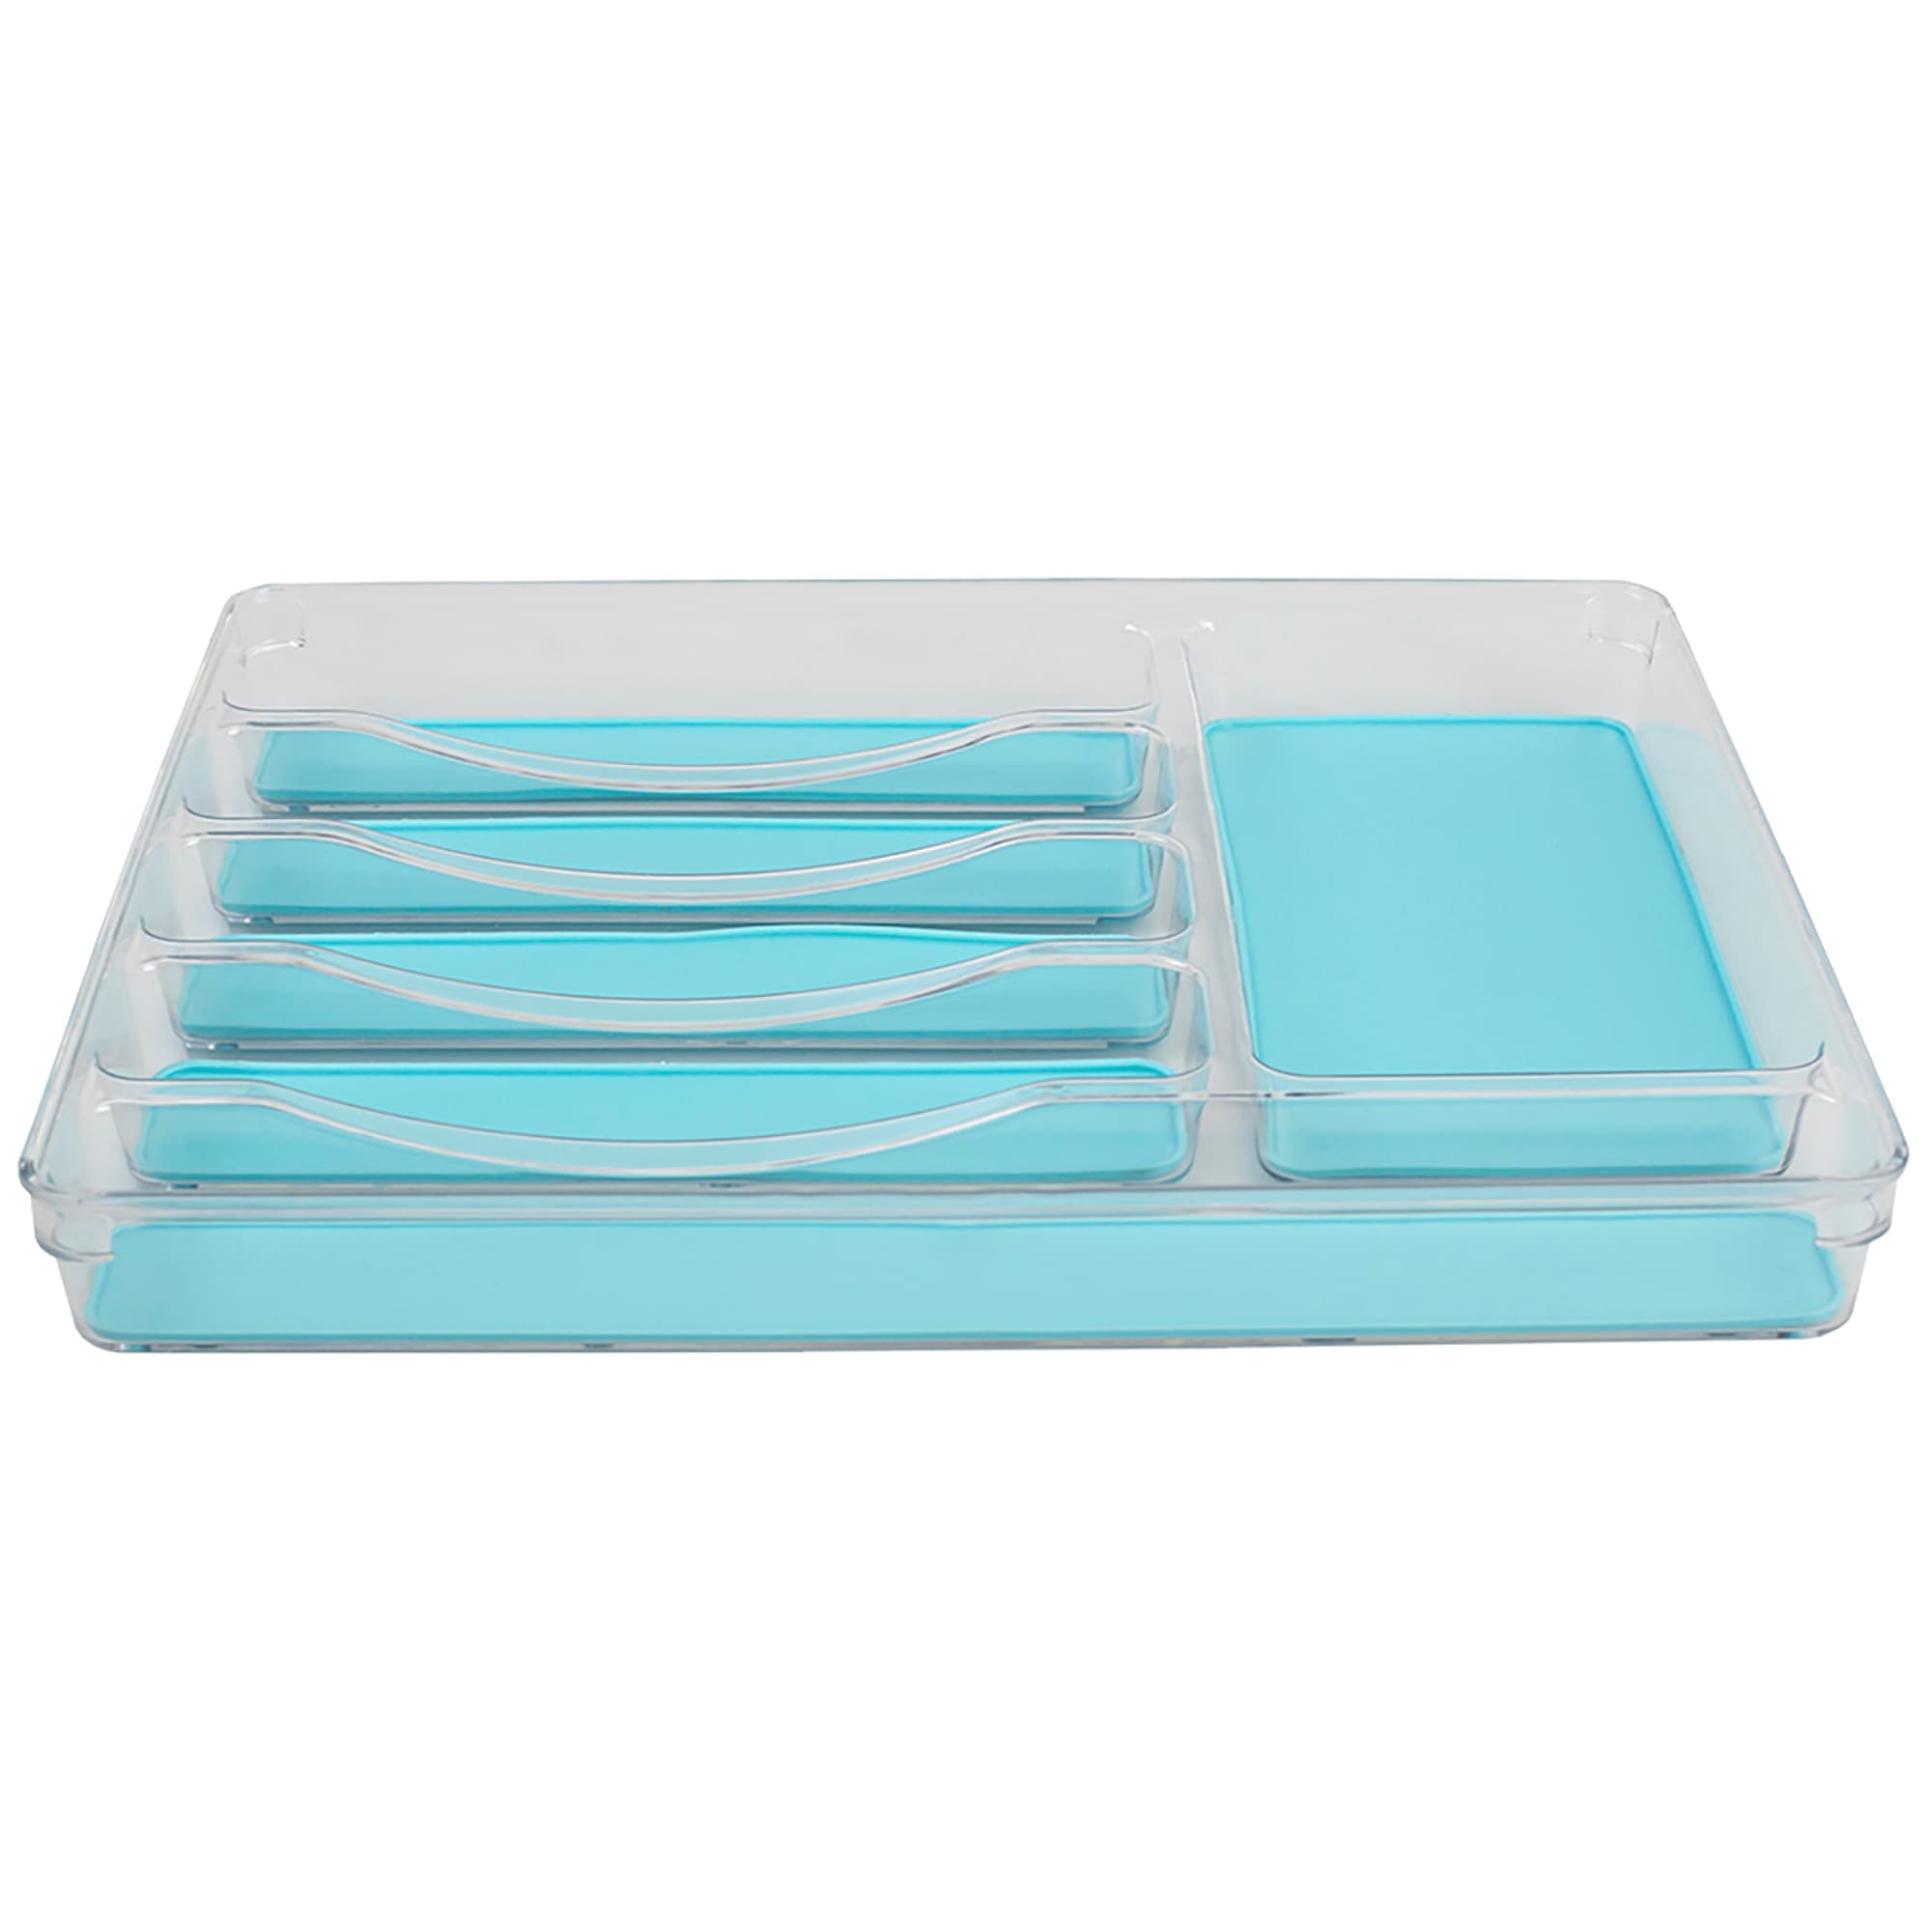 Home Basics 12" x 15" Plastic Cutlery Tray with Rubber-Lined Compartments, Turquoise $10.00 EACH, CASE PACK OF 12